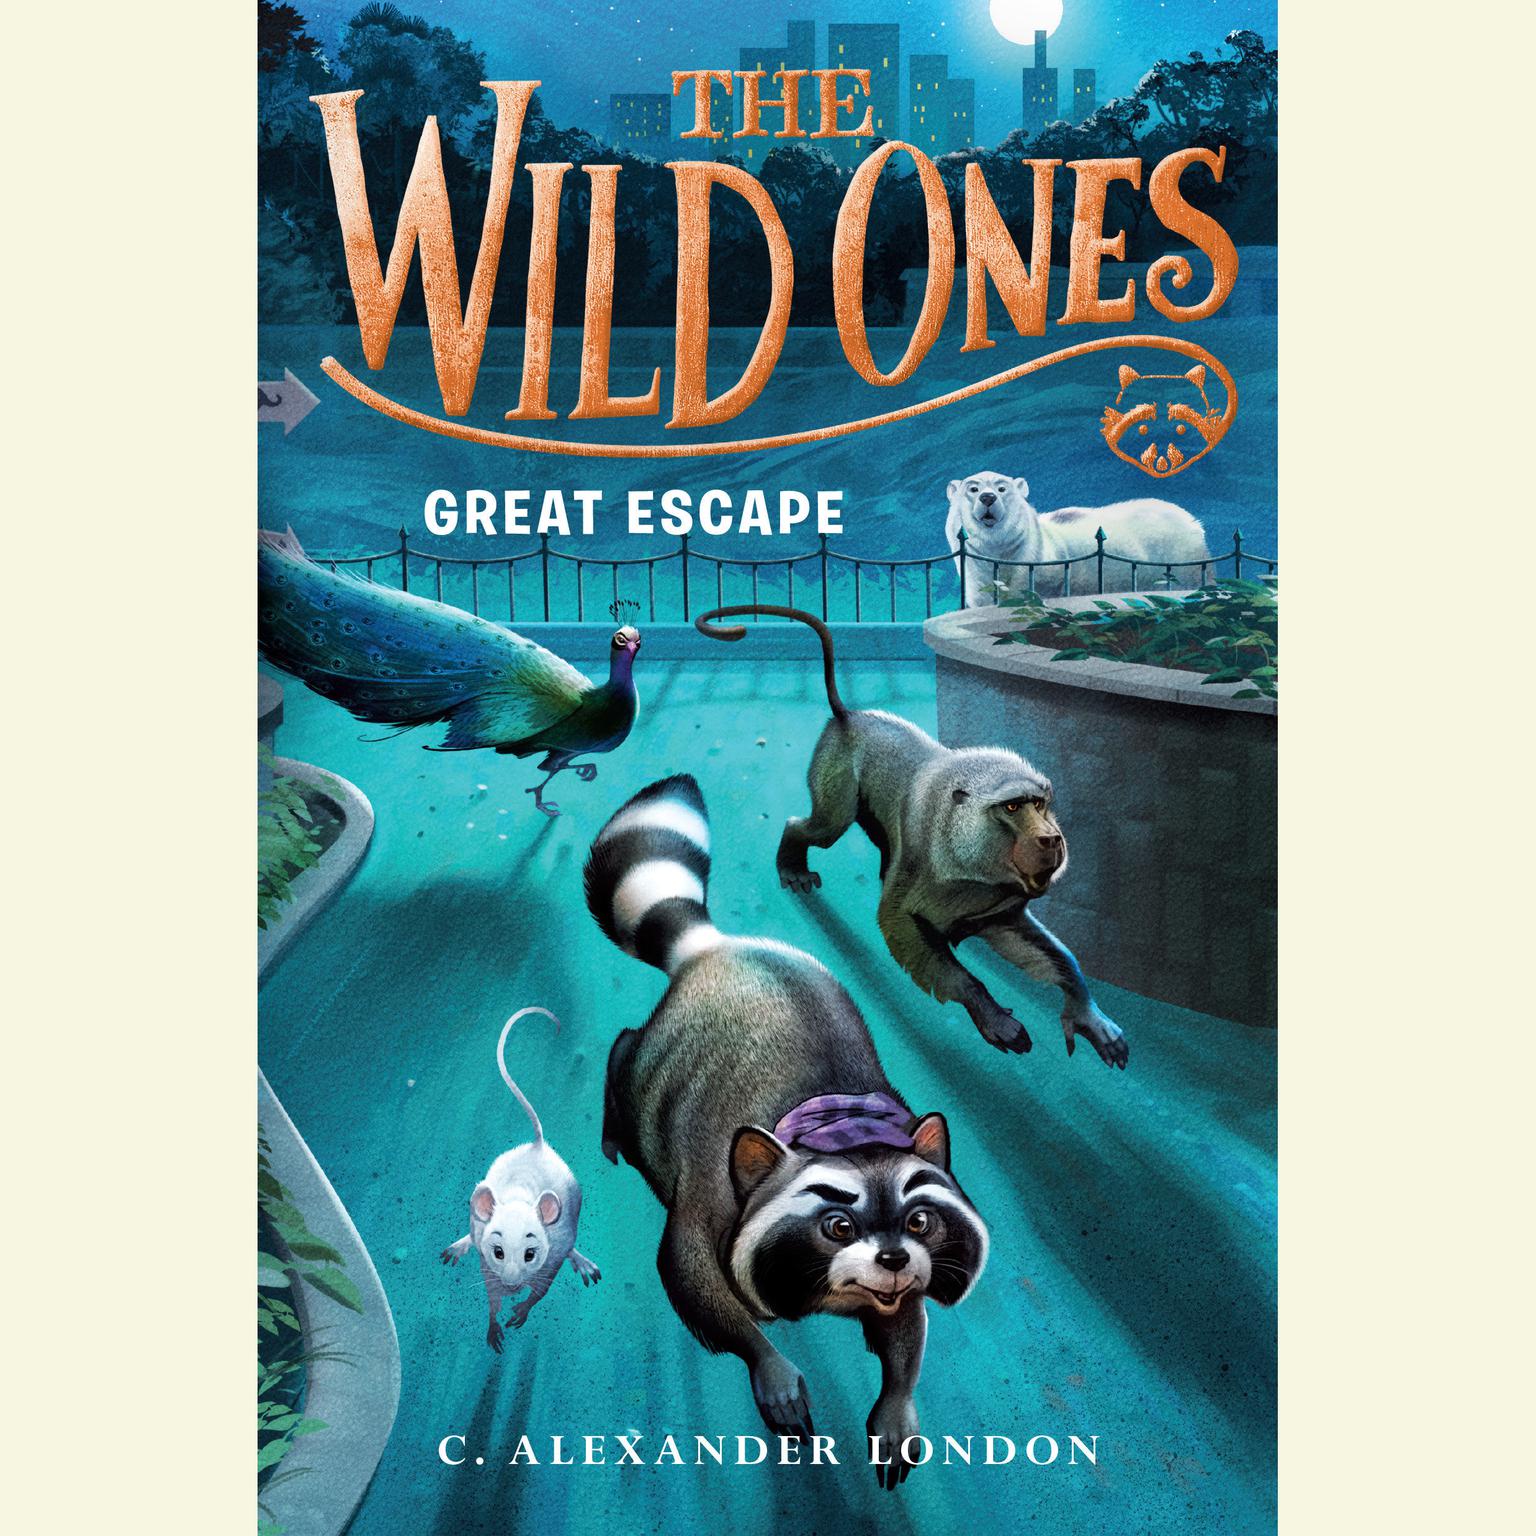 The Wild Ones: Great Escape Audiobook, by C. Alexander London